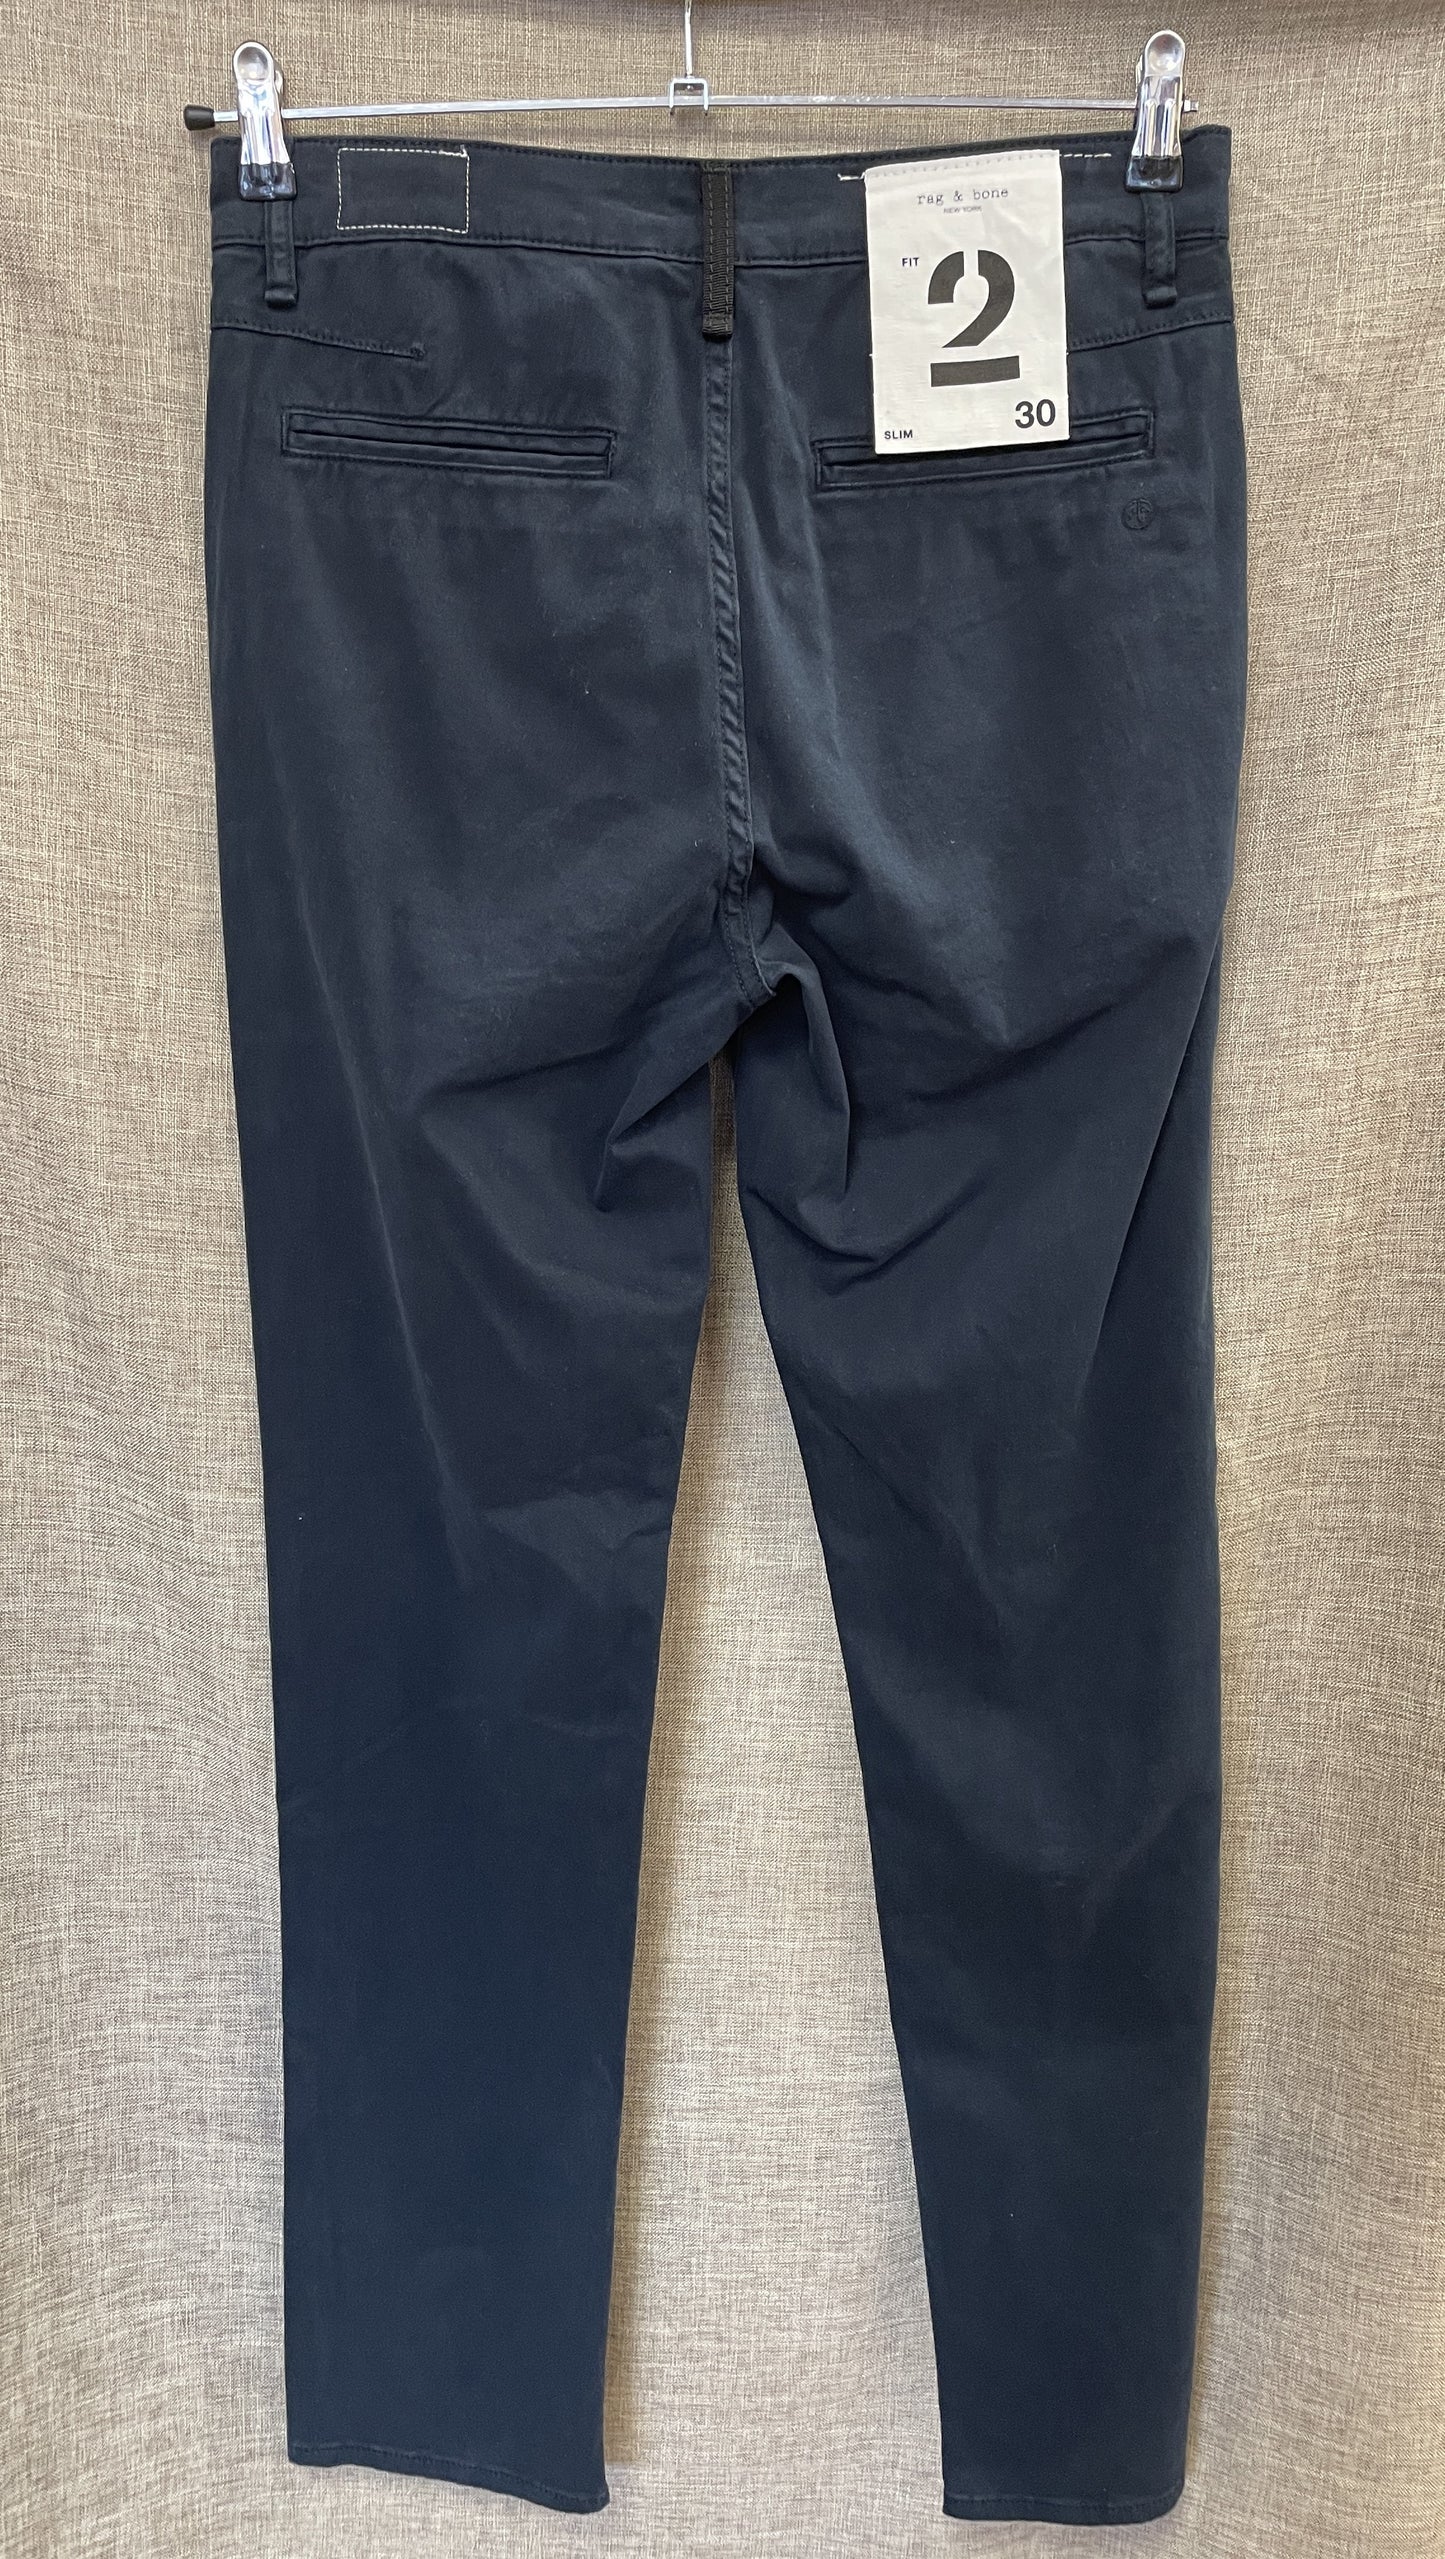 New with Tags Rag & Bone Navy Blue 'Salute' Chino Trousers Size 30 Medium